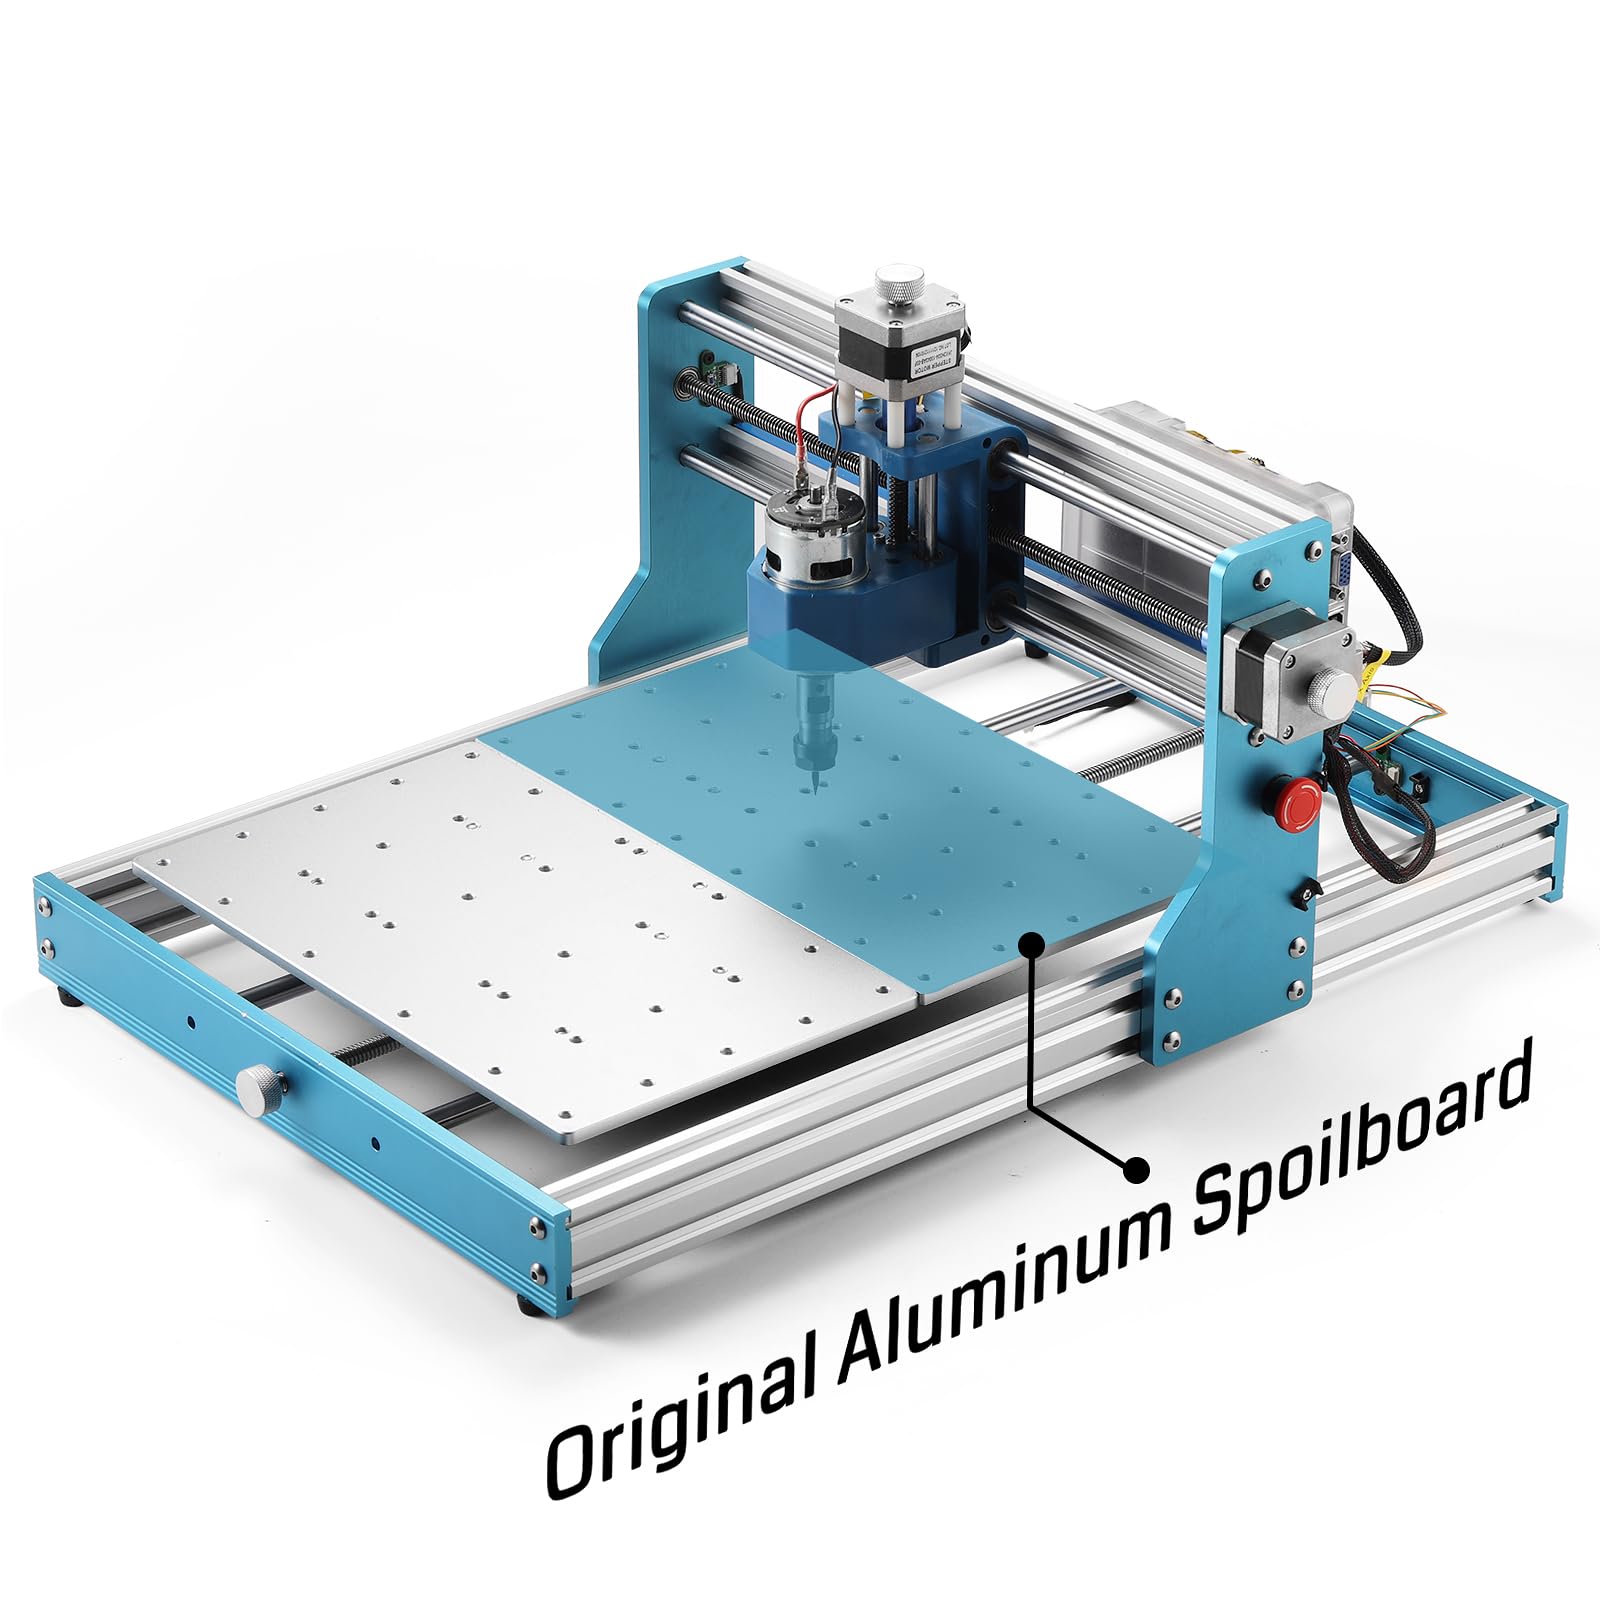 Genmitsu 3040 Extension Aluminum Spoilboard for 3018-PROVer V2 Y-Axis Extension Kit, XY Effective Working Area 300mm x 400mm